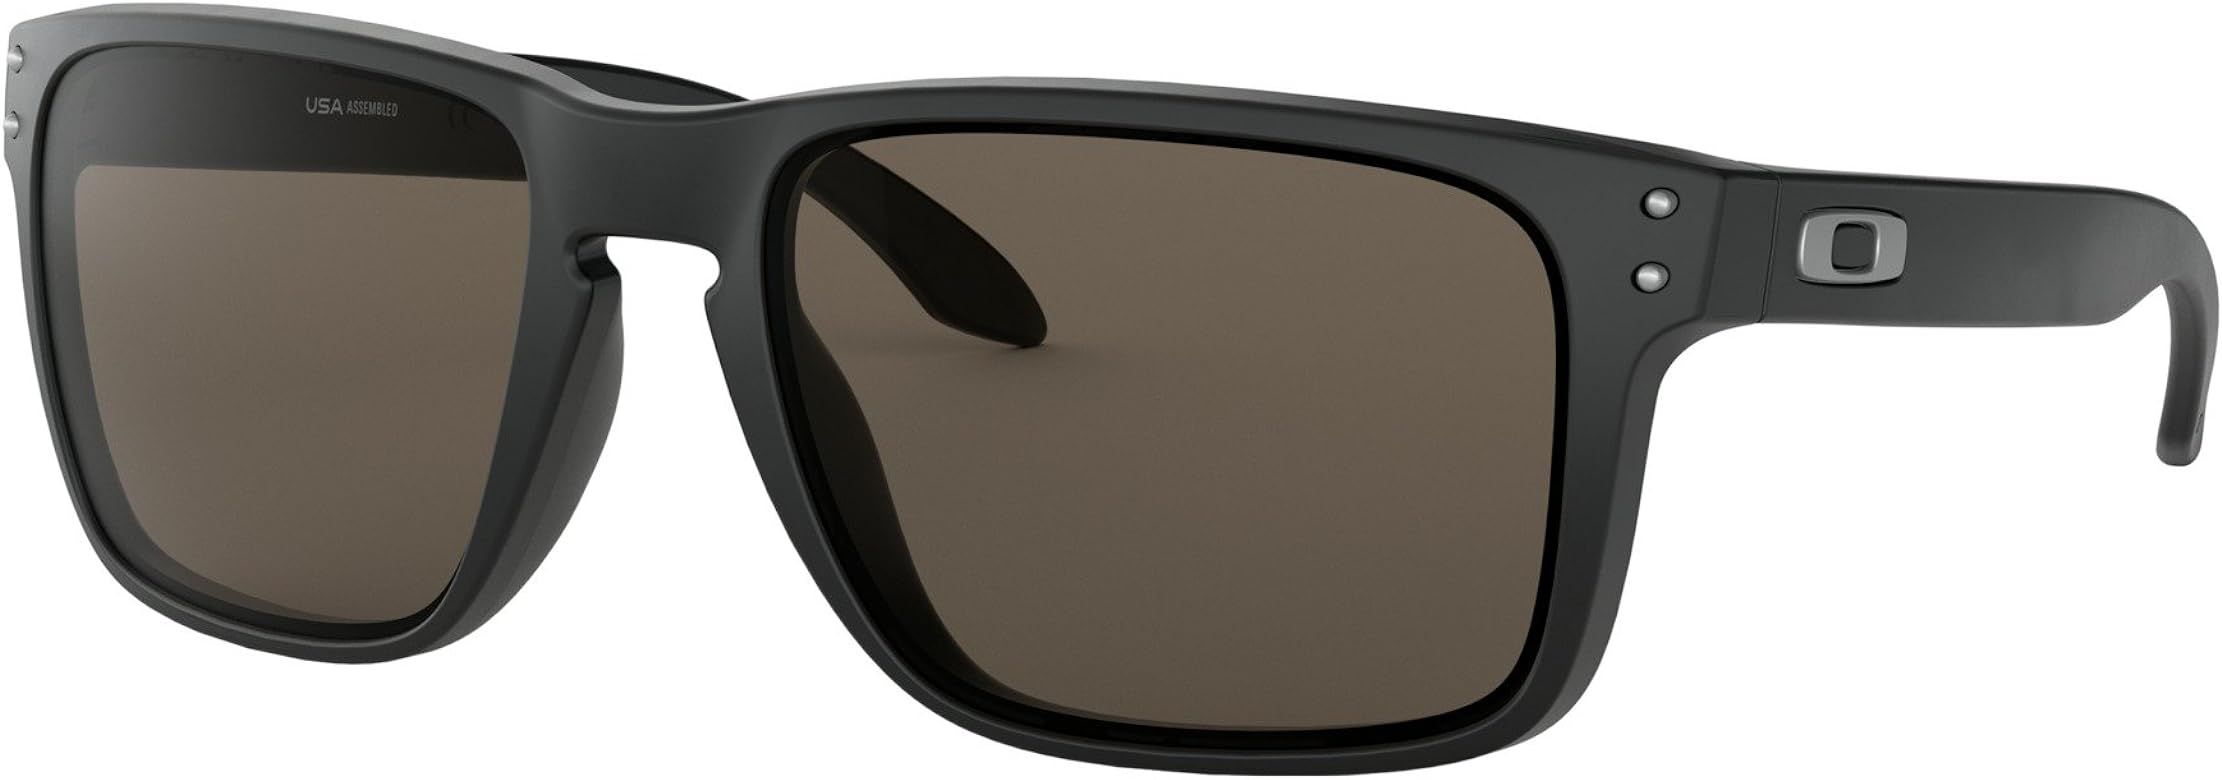 Oakley Holbrook Sunglasses (Matte Black Frame, Warm Grey Lens) with Lens Cleaning Kit and Country... | Amazon (US)